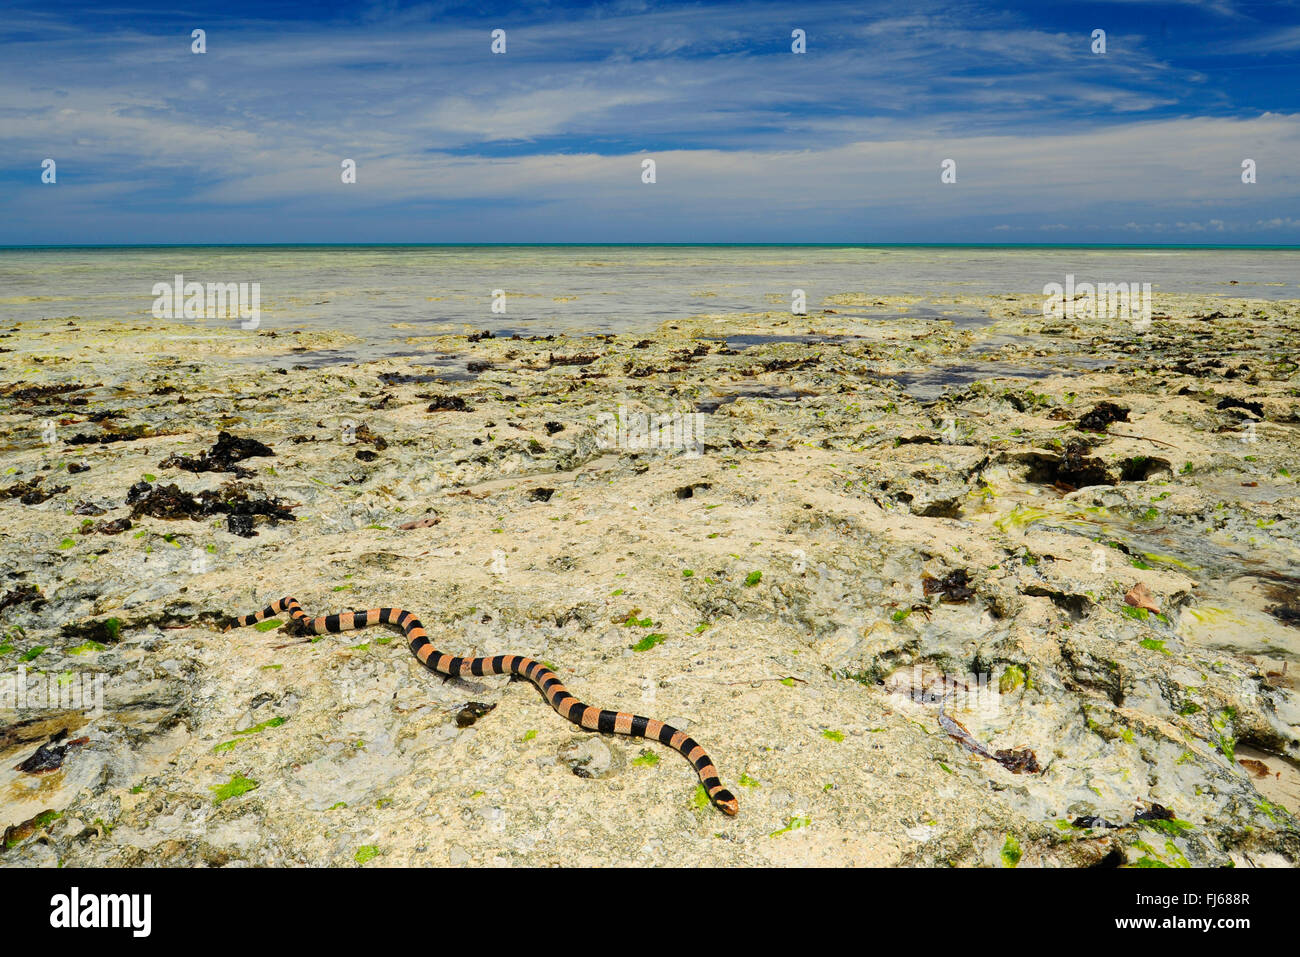 Banded yellow-lipped sea krait, Banded yellow-lipped sea snake, Banded sea snake (Laticauda colubrina), sea snake at the seascape, New Caledonia, Ile des Pins Stock Photo